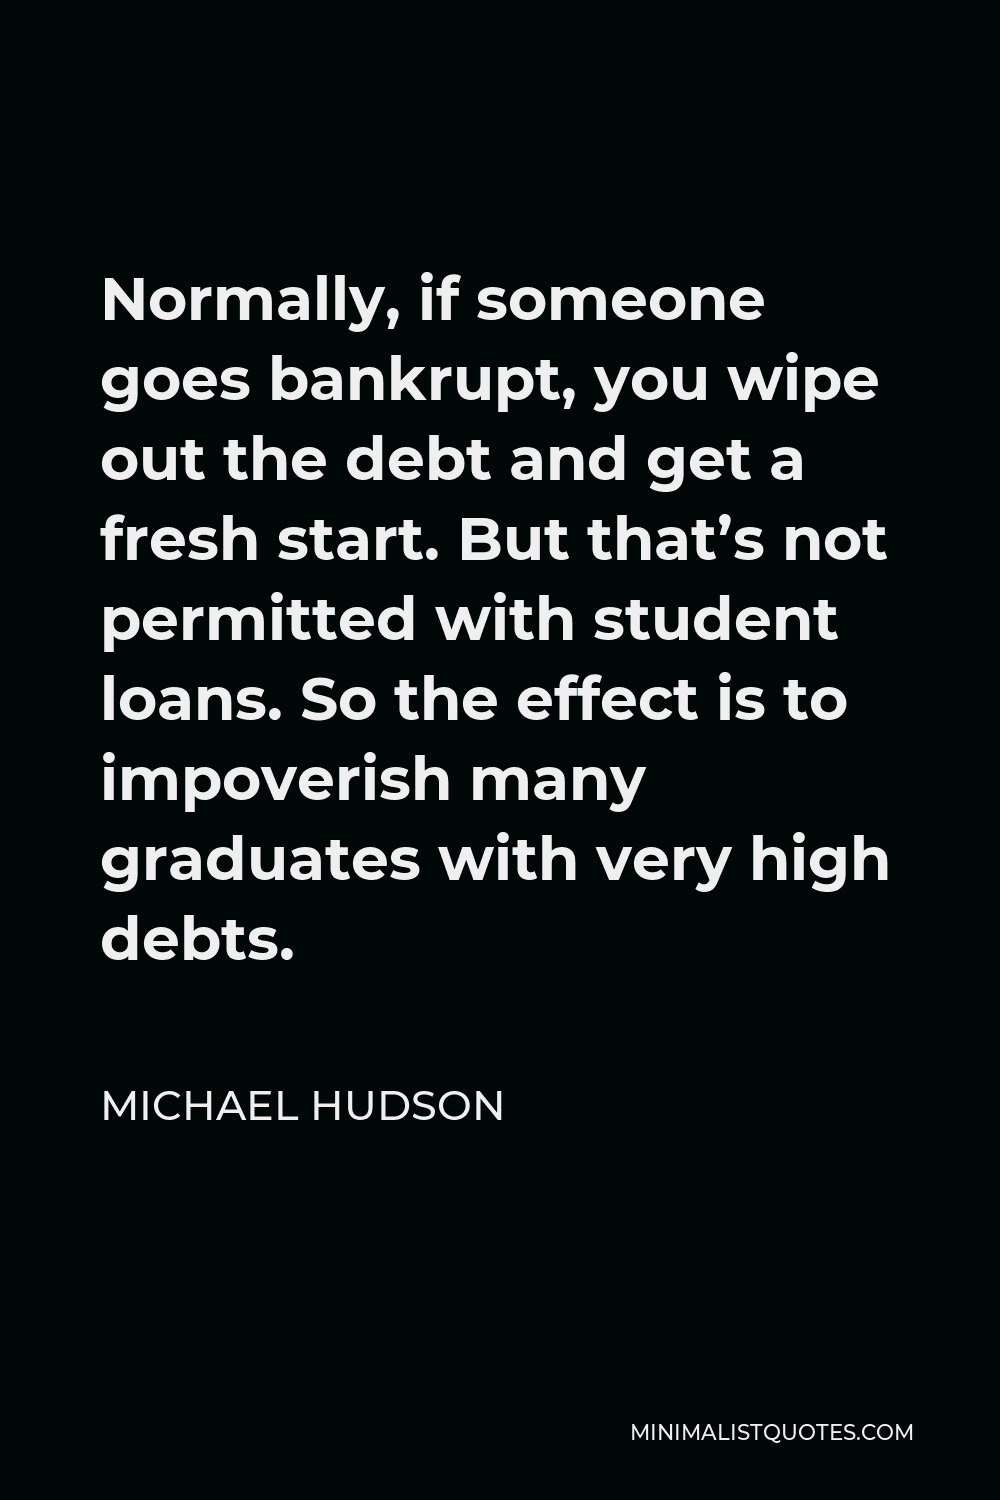 Michael Hudson Quote - Normally, if someone goes bankrupt, you wipe out the debt and get a fresh start. But that’s not permitted with student loans. So the effect is to impoverish many graduates with very high debts.